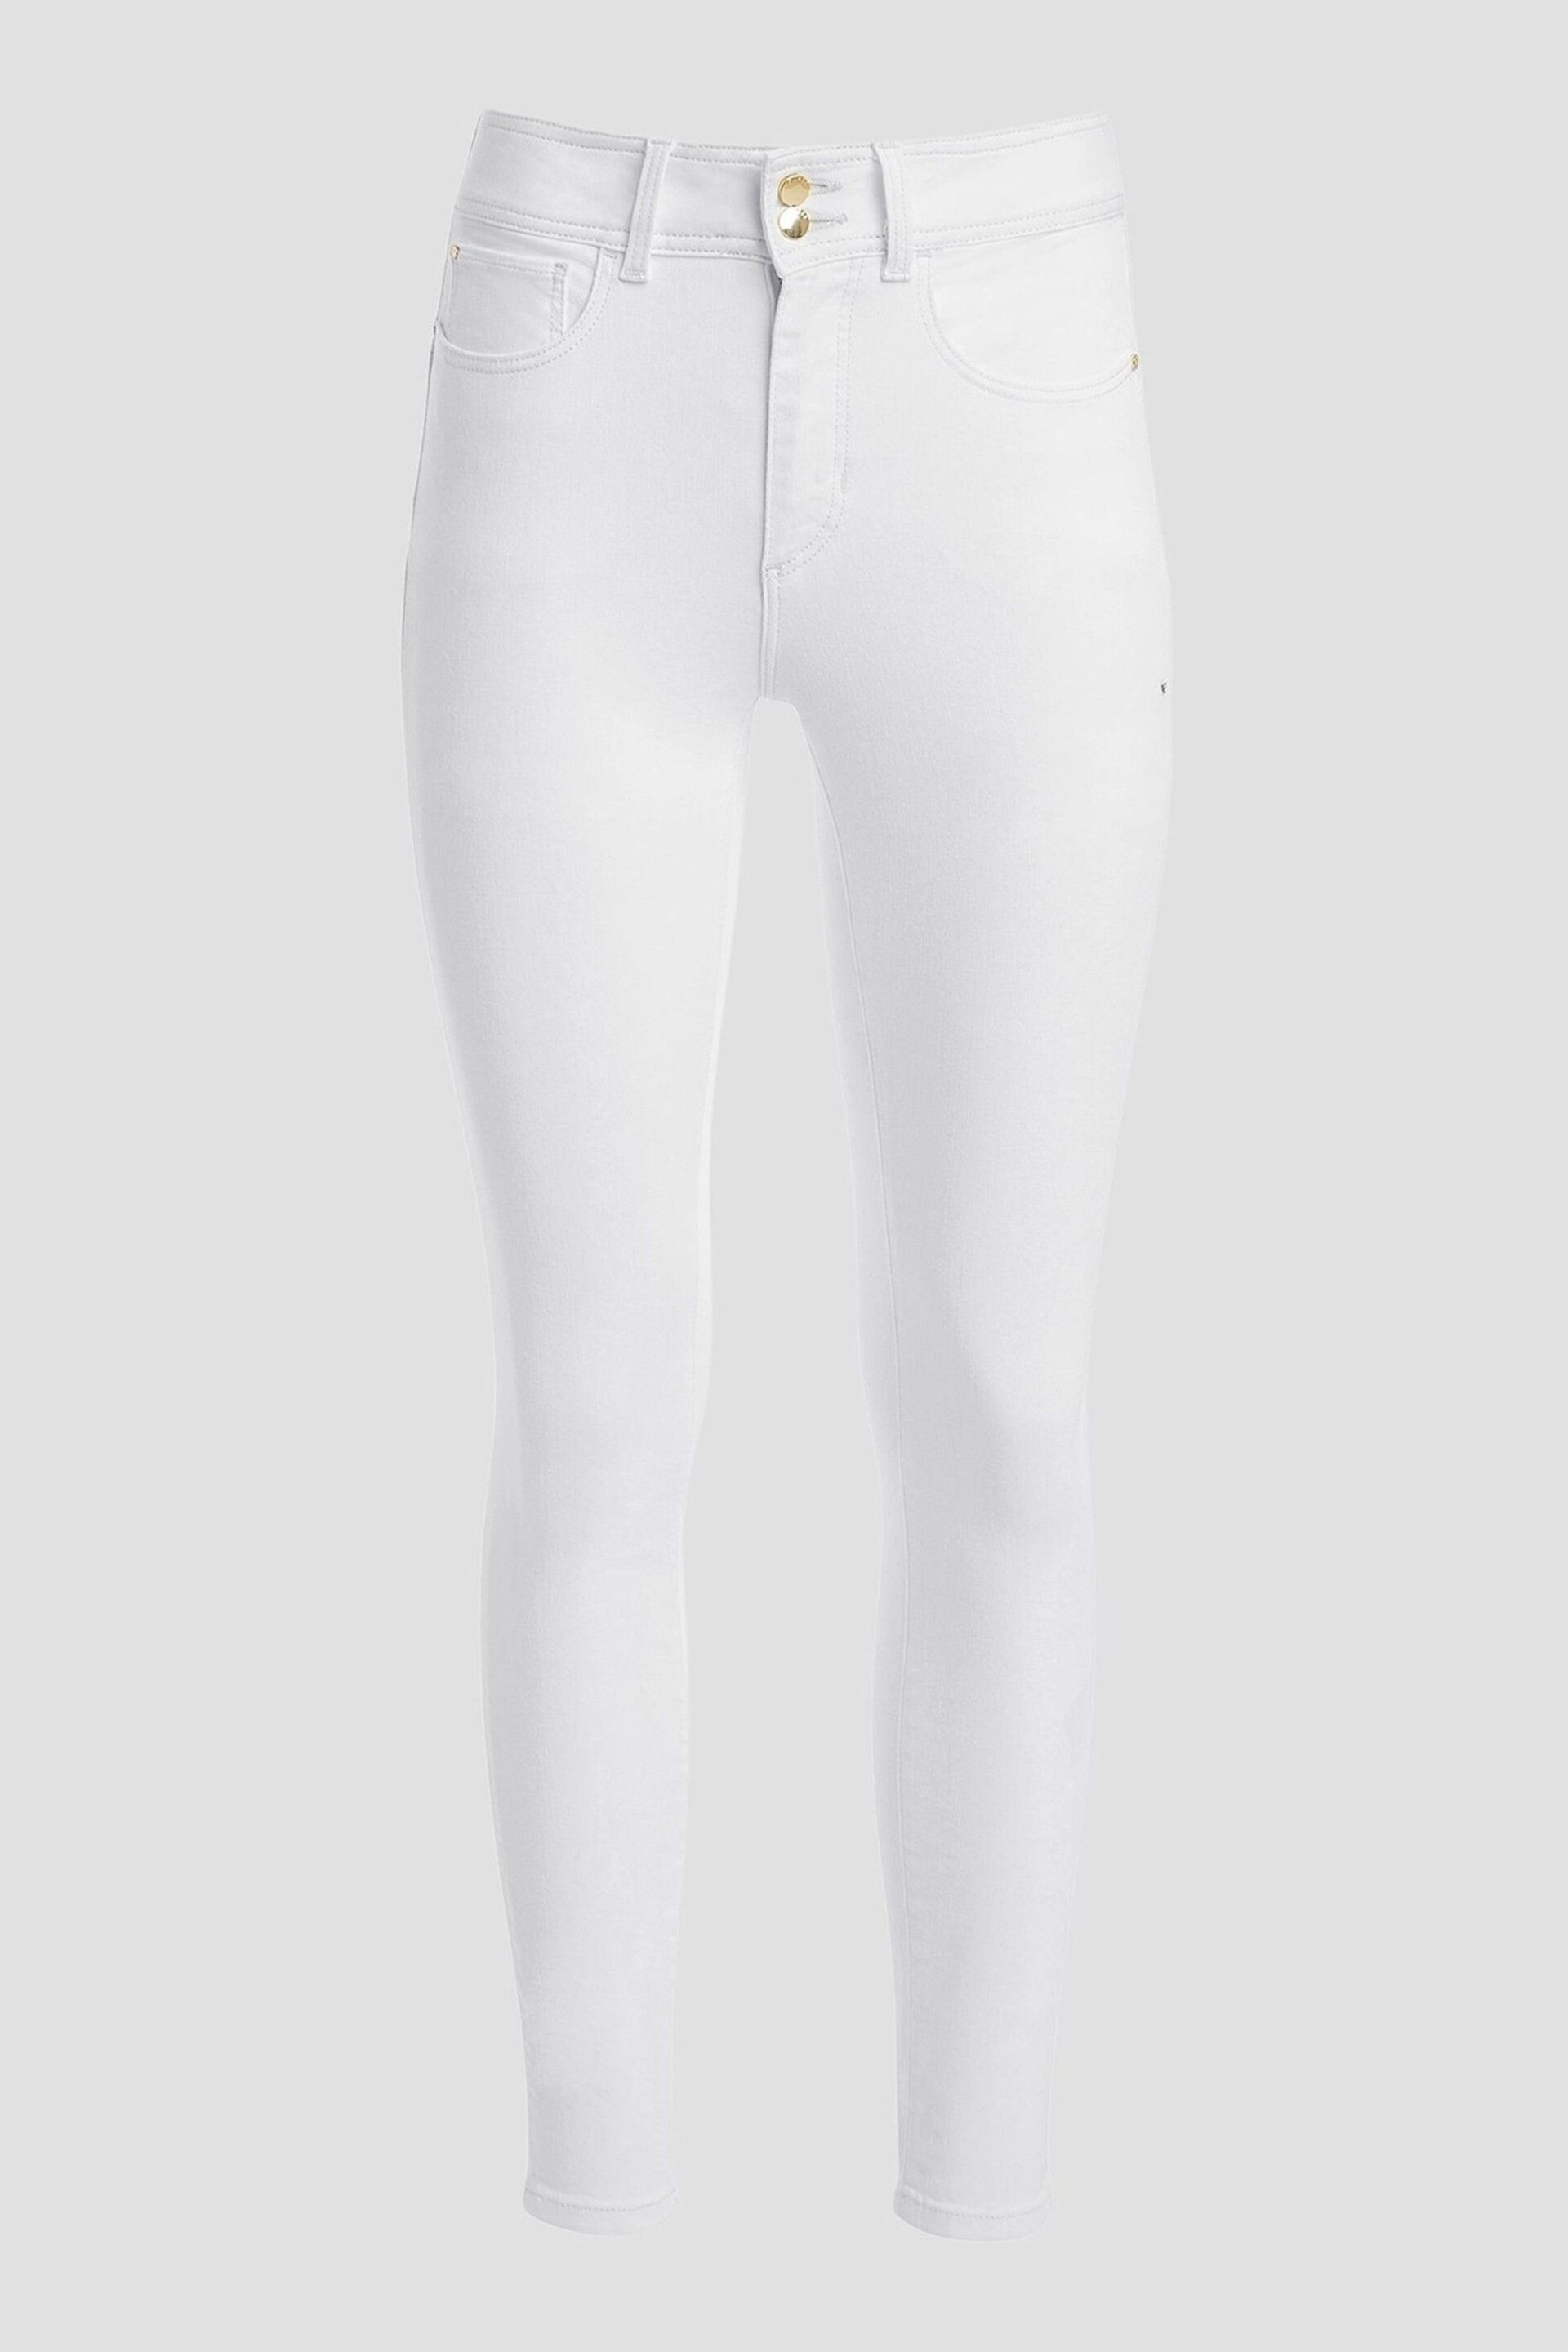 Guess White Shape Up Skinny Jeans - Image 7 of 7